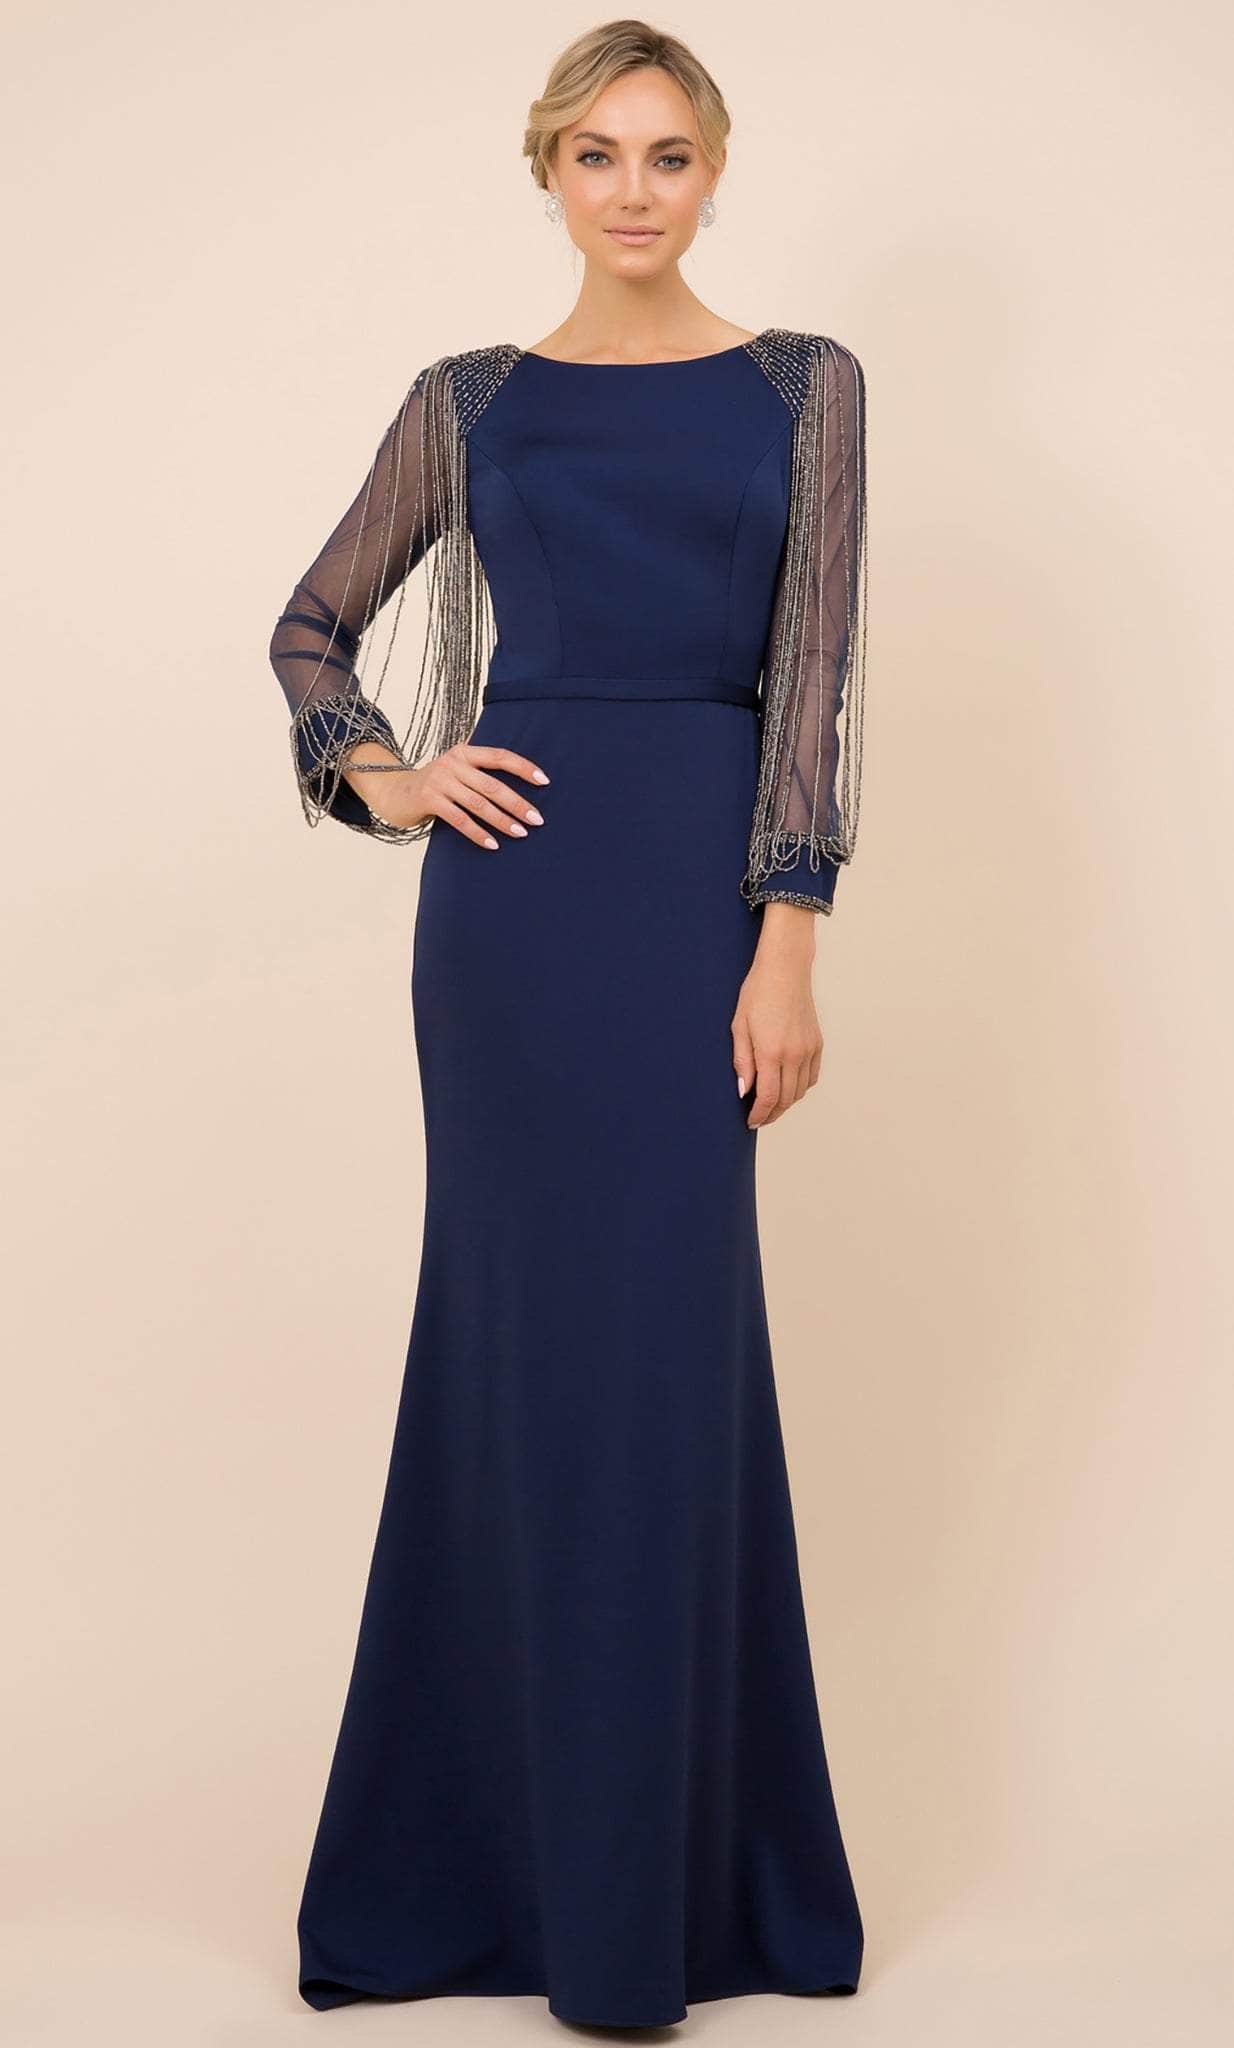 Nox Anabel Y410 - Modest Formal Fringed Evening Gown Mother of the Bride Dresses 10W / Navy Blue